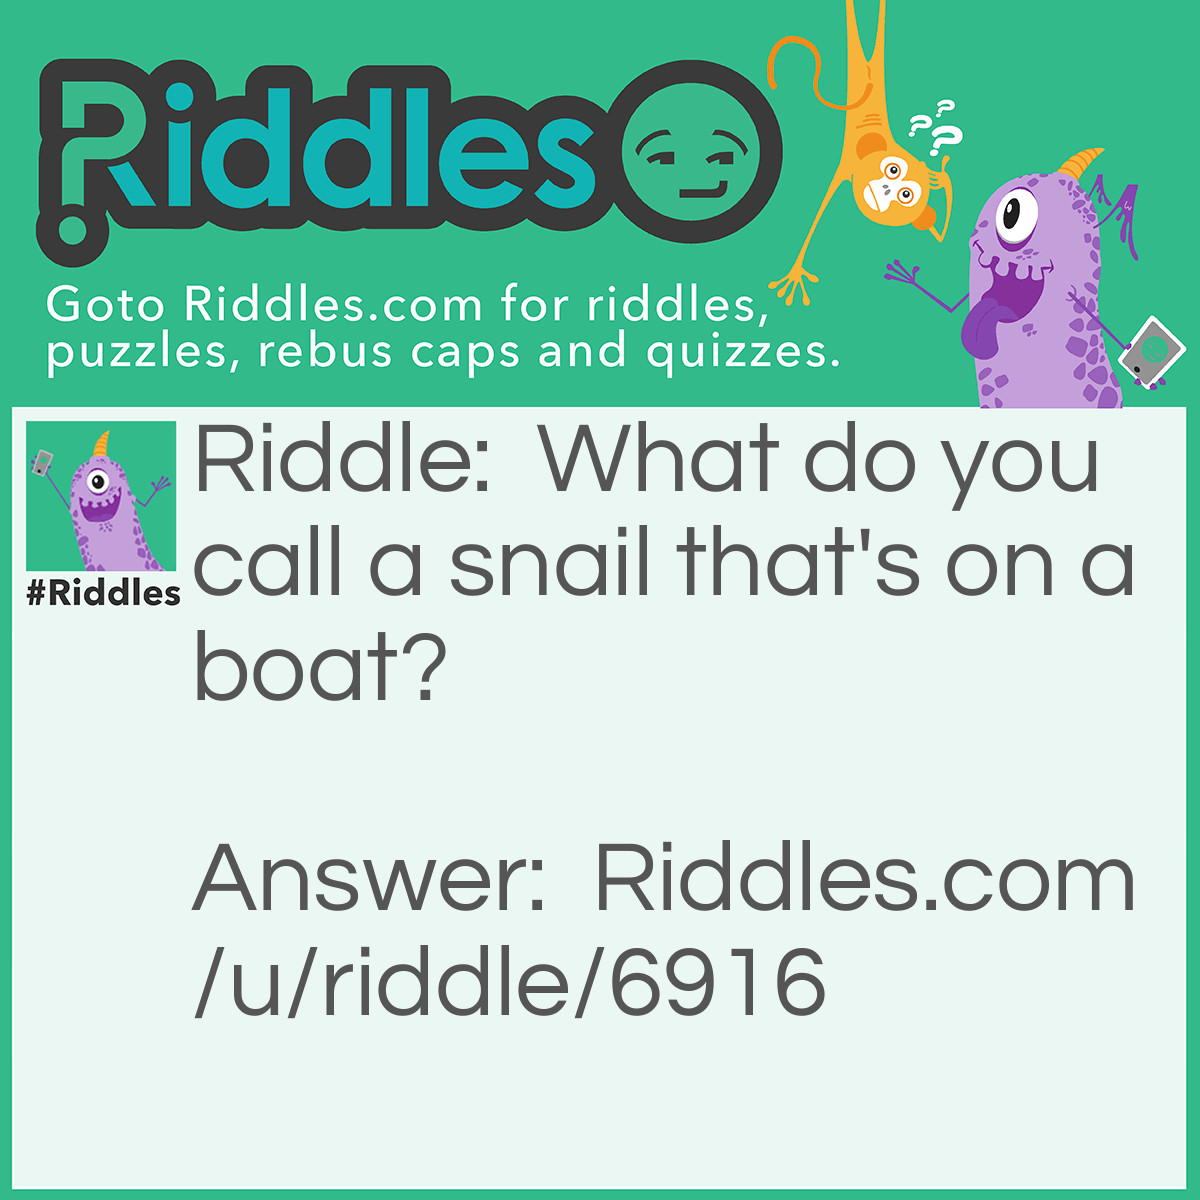 Riddle: What do you call a snail that's on a boat? Answer: A snailor.